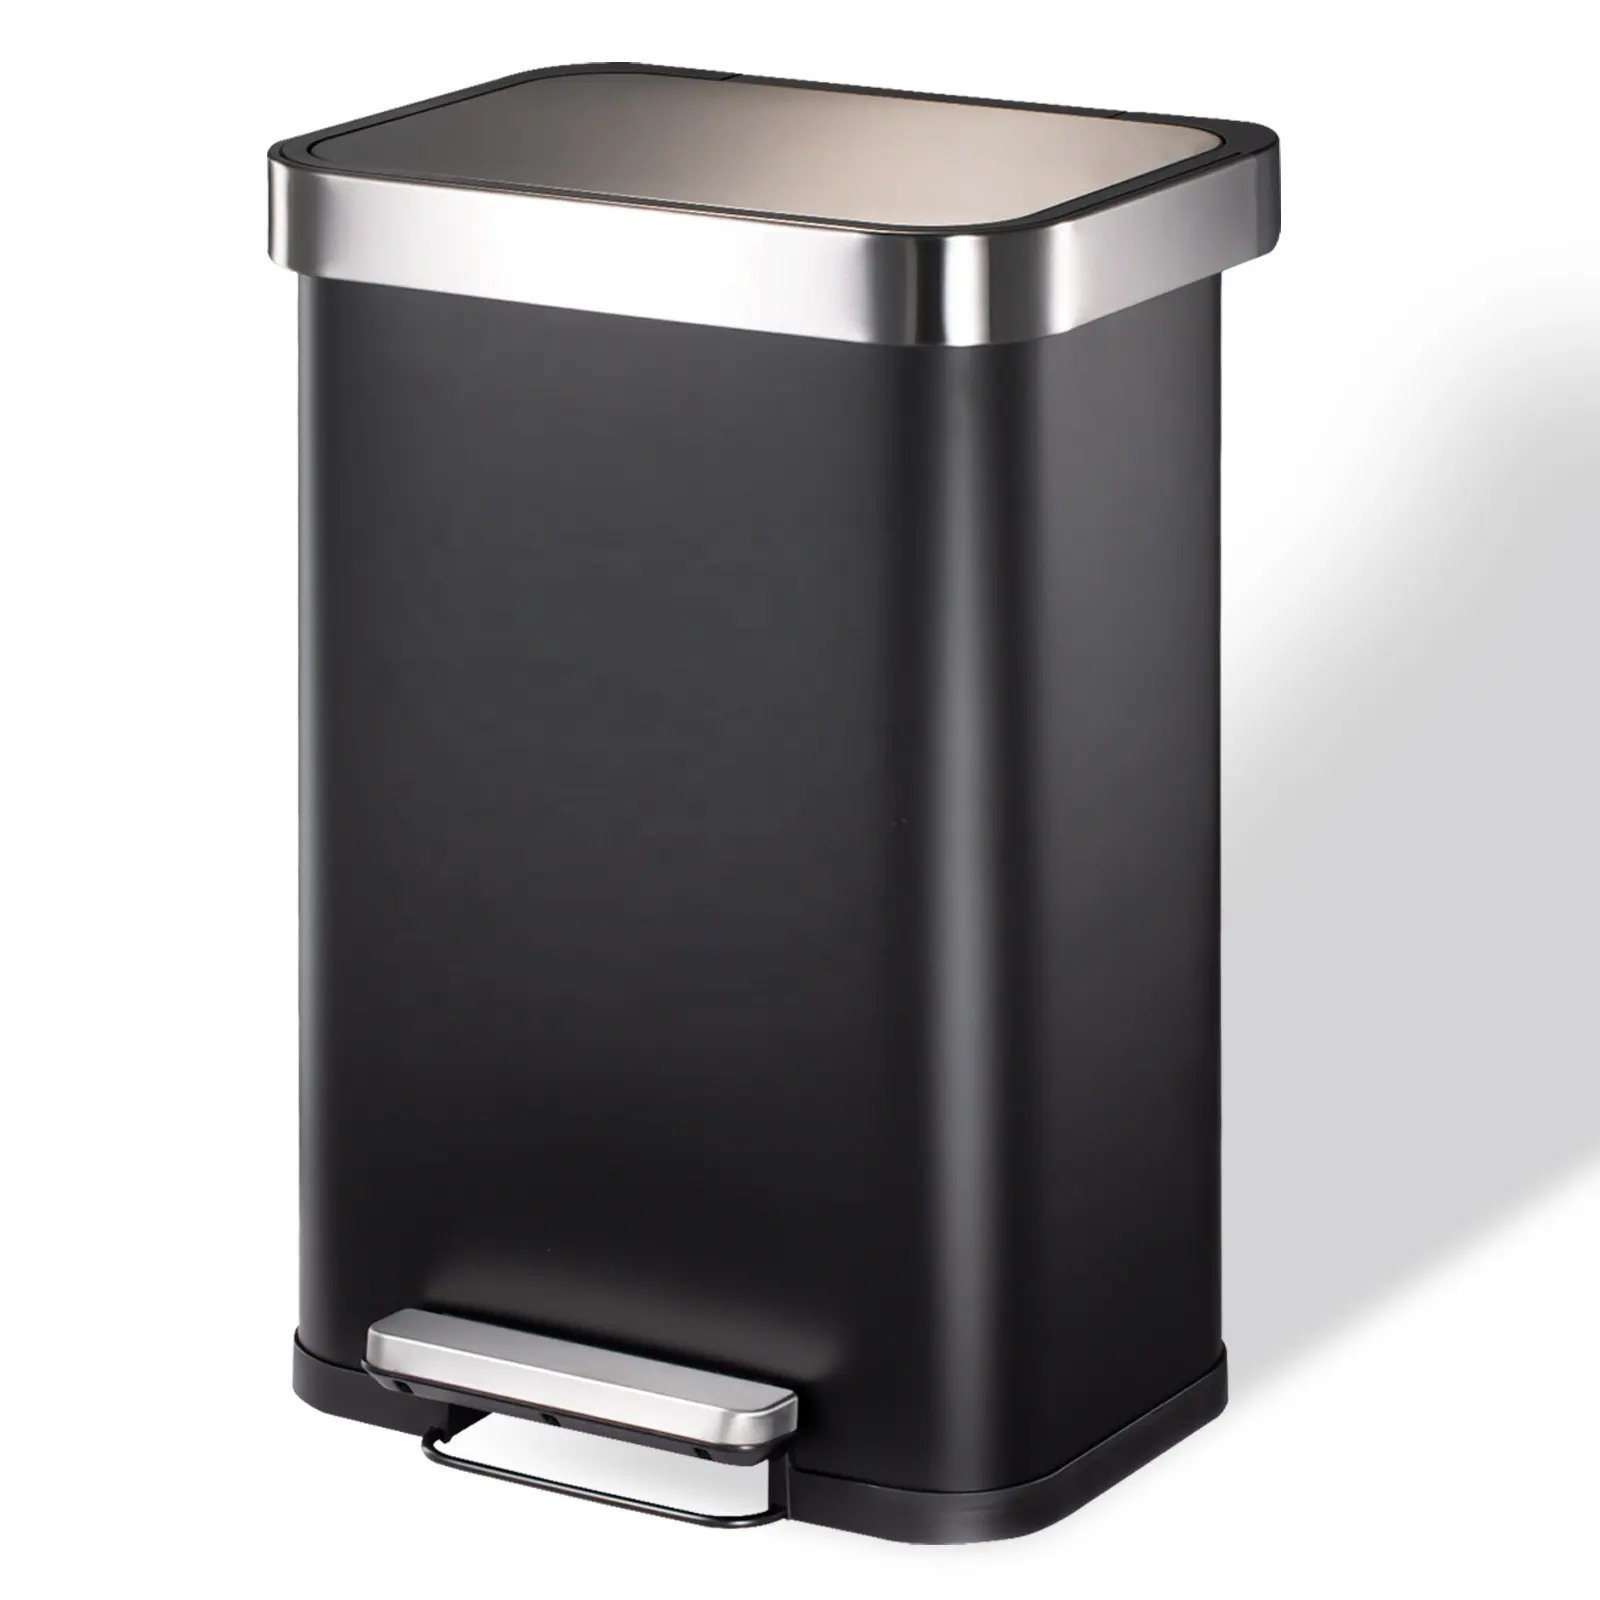 50L Brushed Foot Pedal Bin Hands-Free Solution For Hygienic Waste Disposal With Fair Price